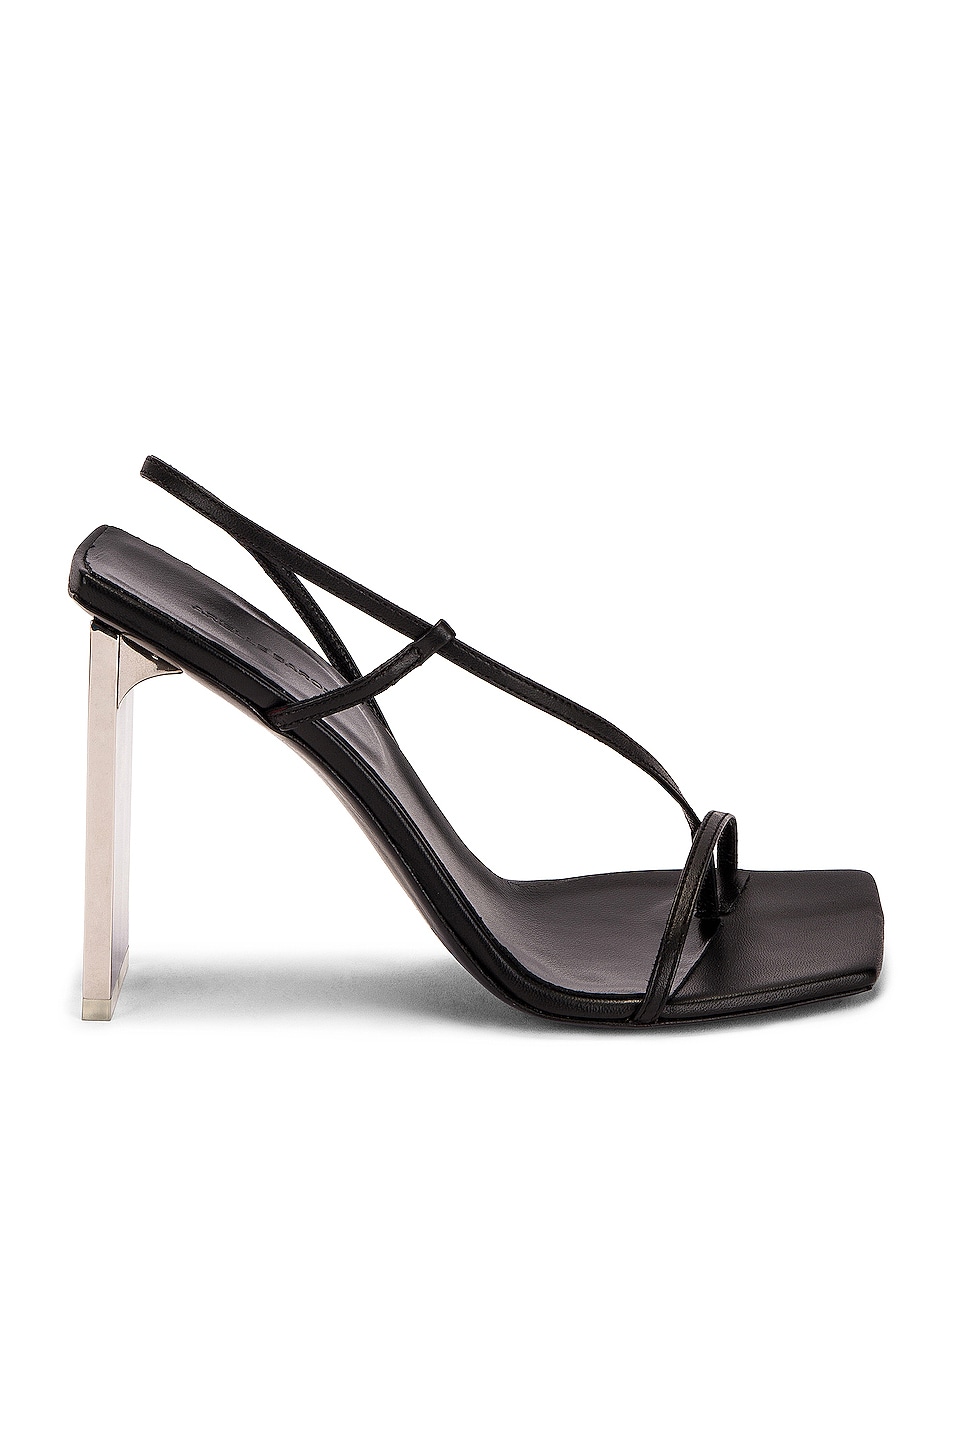 Image 1 of Arielle Baron Narcissus 95 Heel in Black